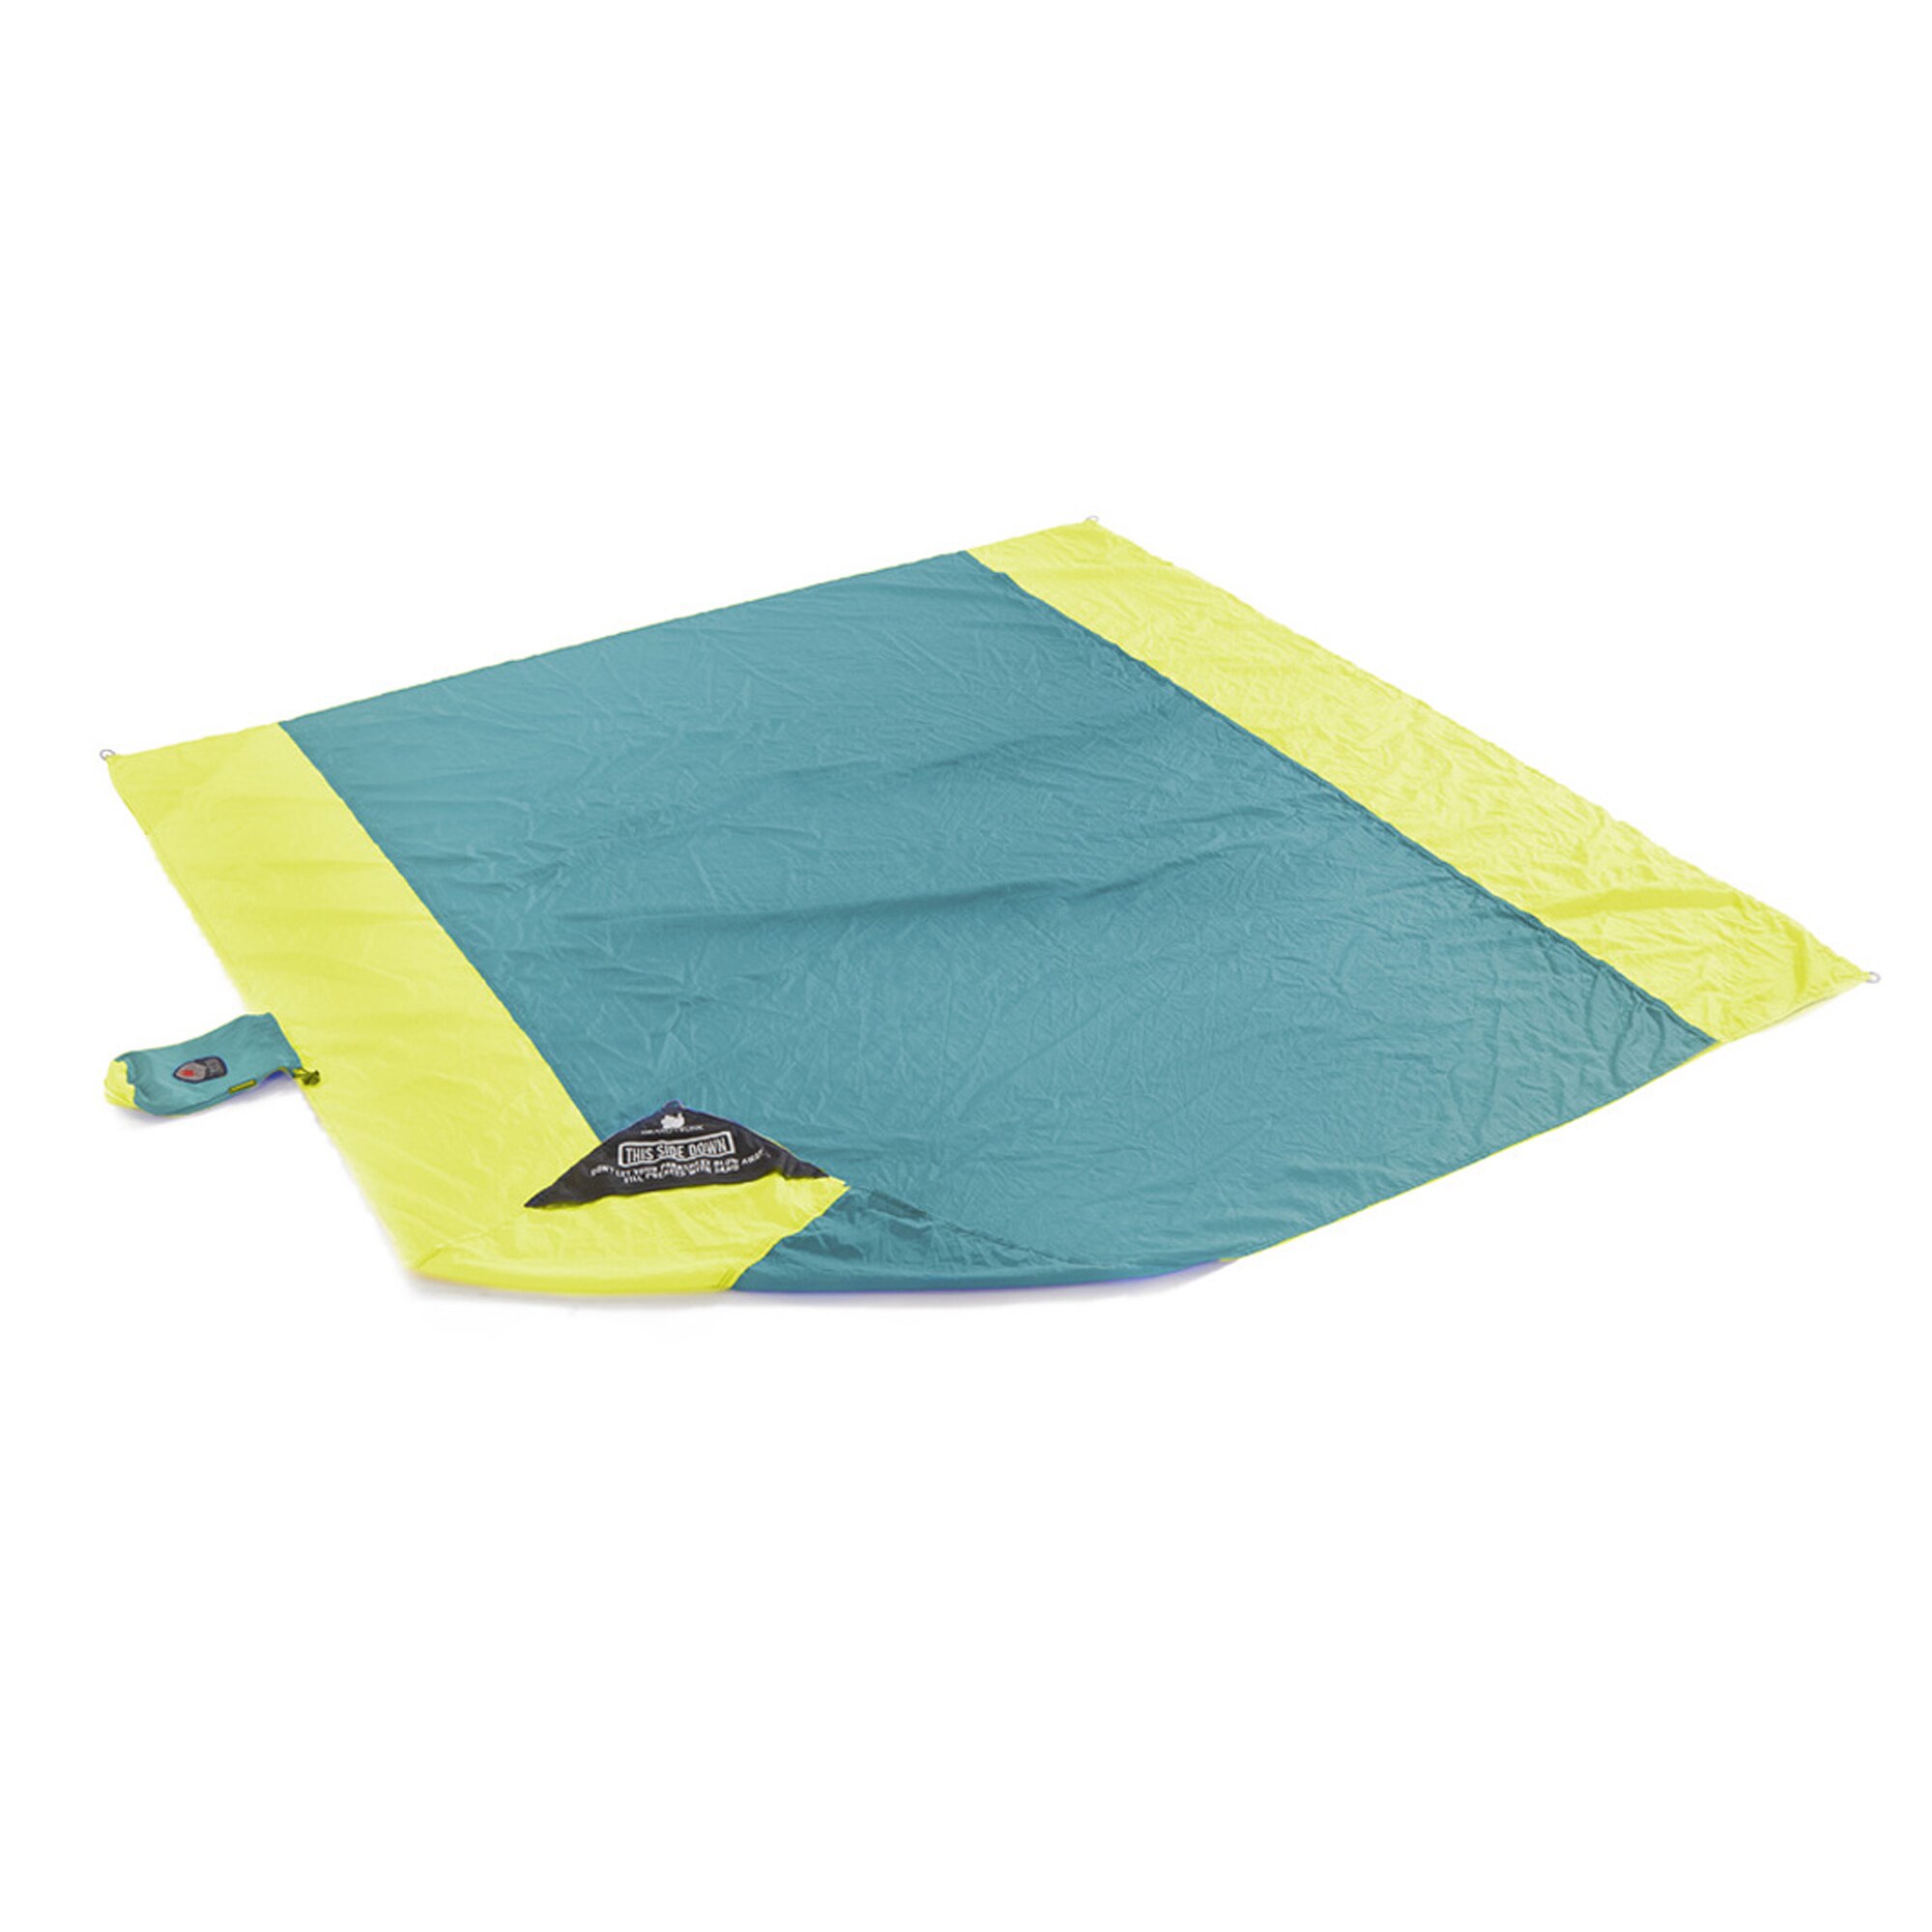 Grand Trunk Parasheet Beach Blanket - Overstock Shopping - Top Rated ...